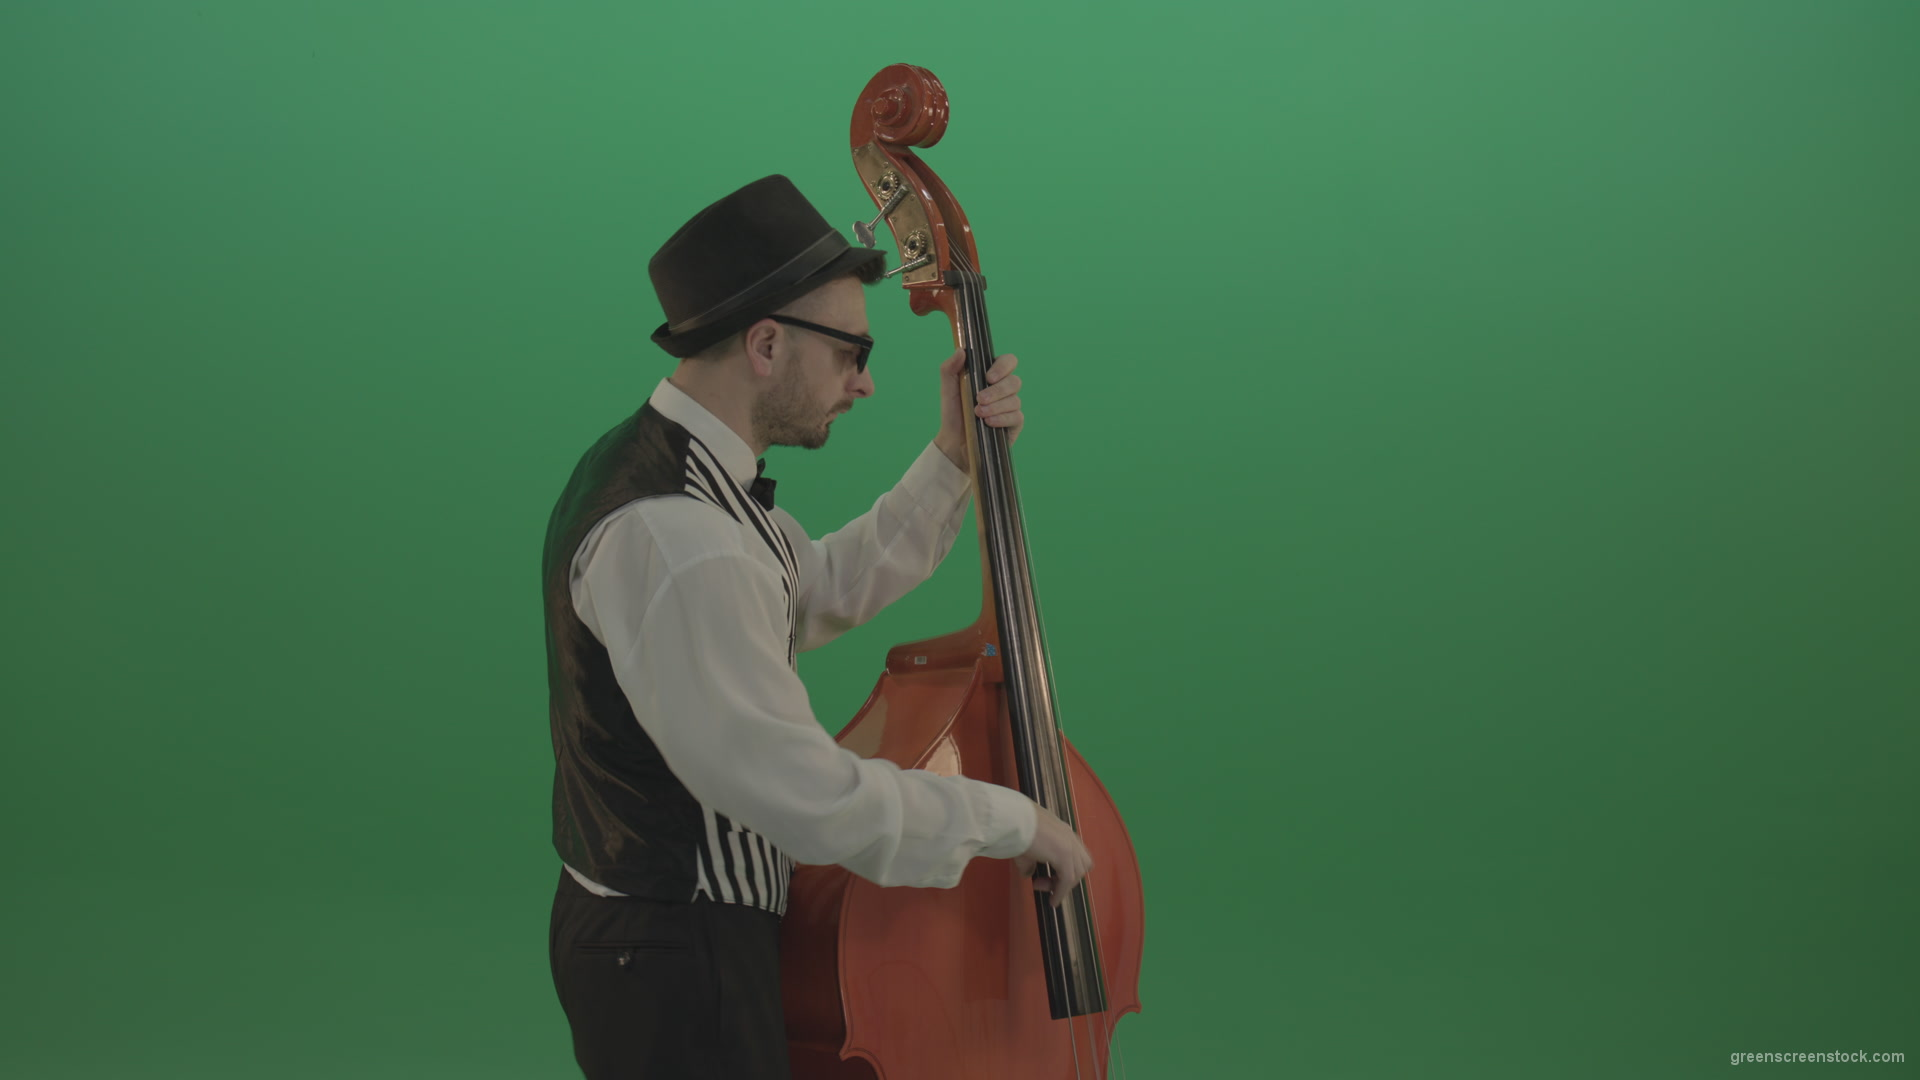 Young-Man-play-jazz-on-double-bass-String-music-instrument-isolated-on-green-screen-in-back-side-view_005 Green Screen Stock